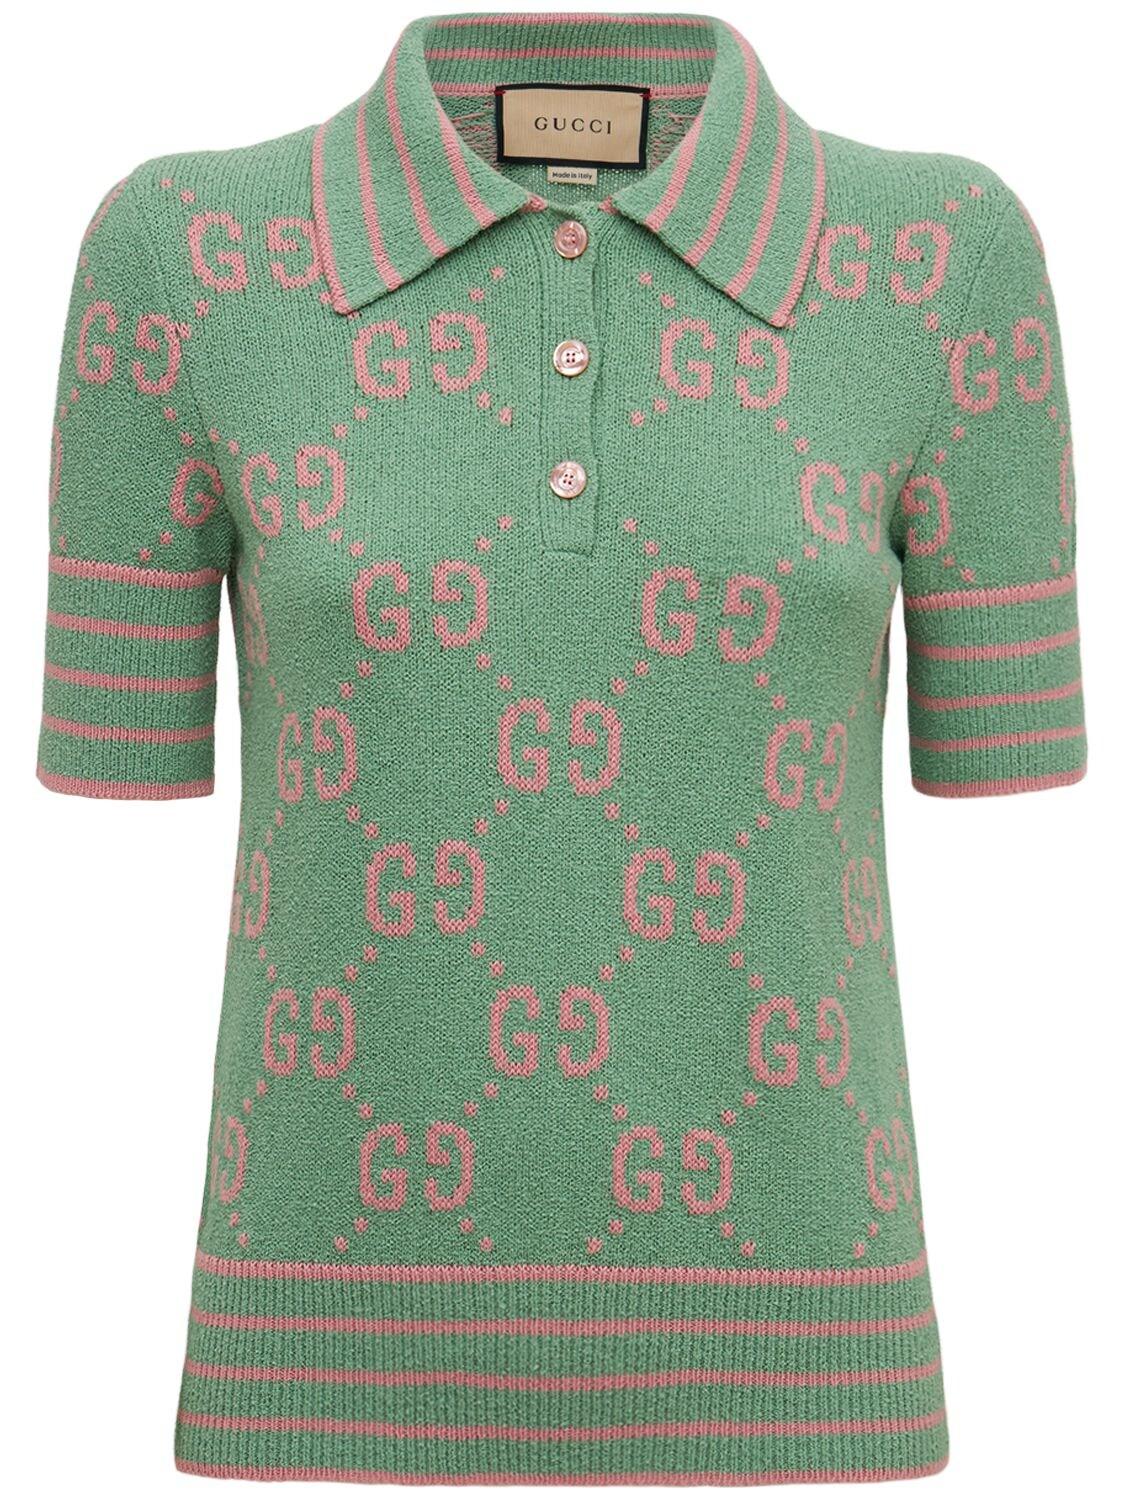 Gucci Gg Cotton Jacquard Polo in Light Green (Green) | Lyst